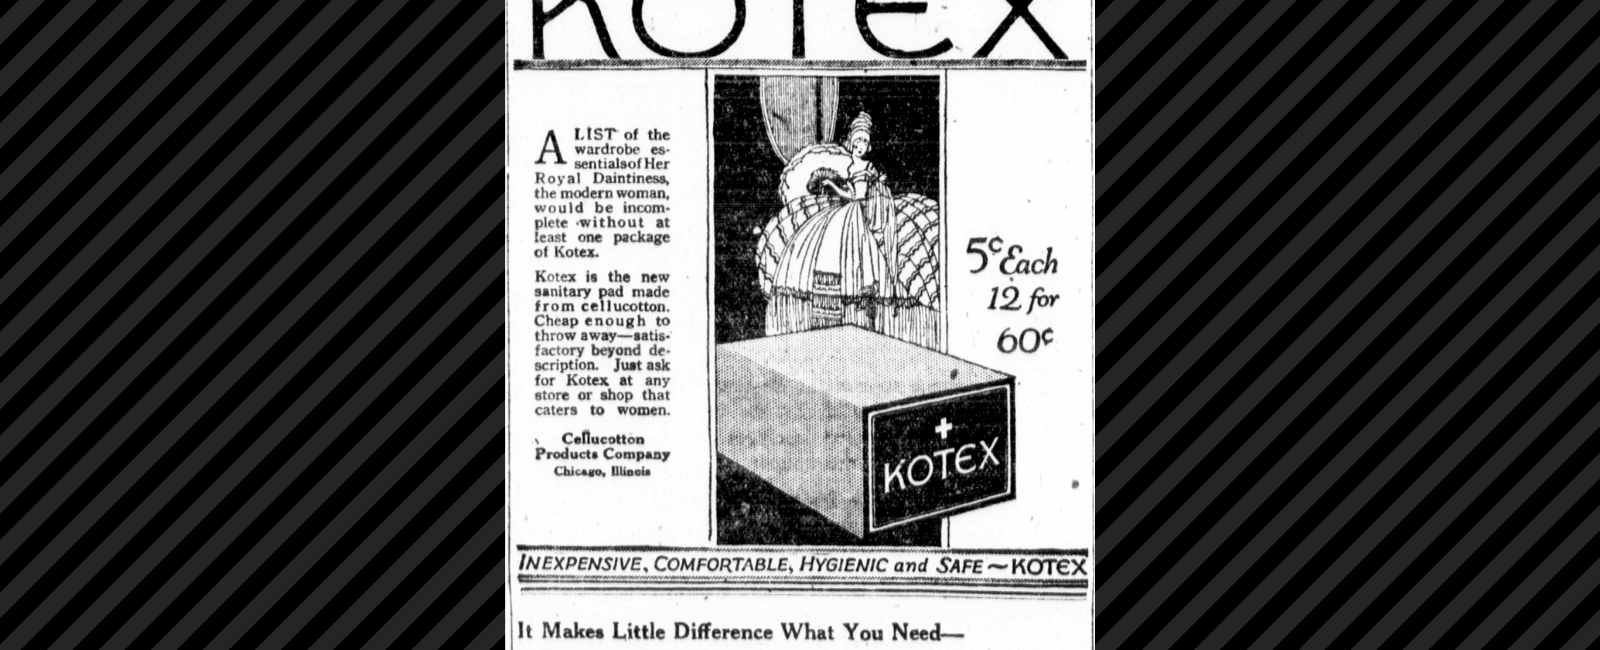 Kotex was first manufactured as bandages during wwi